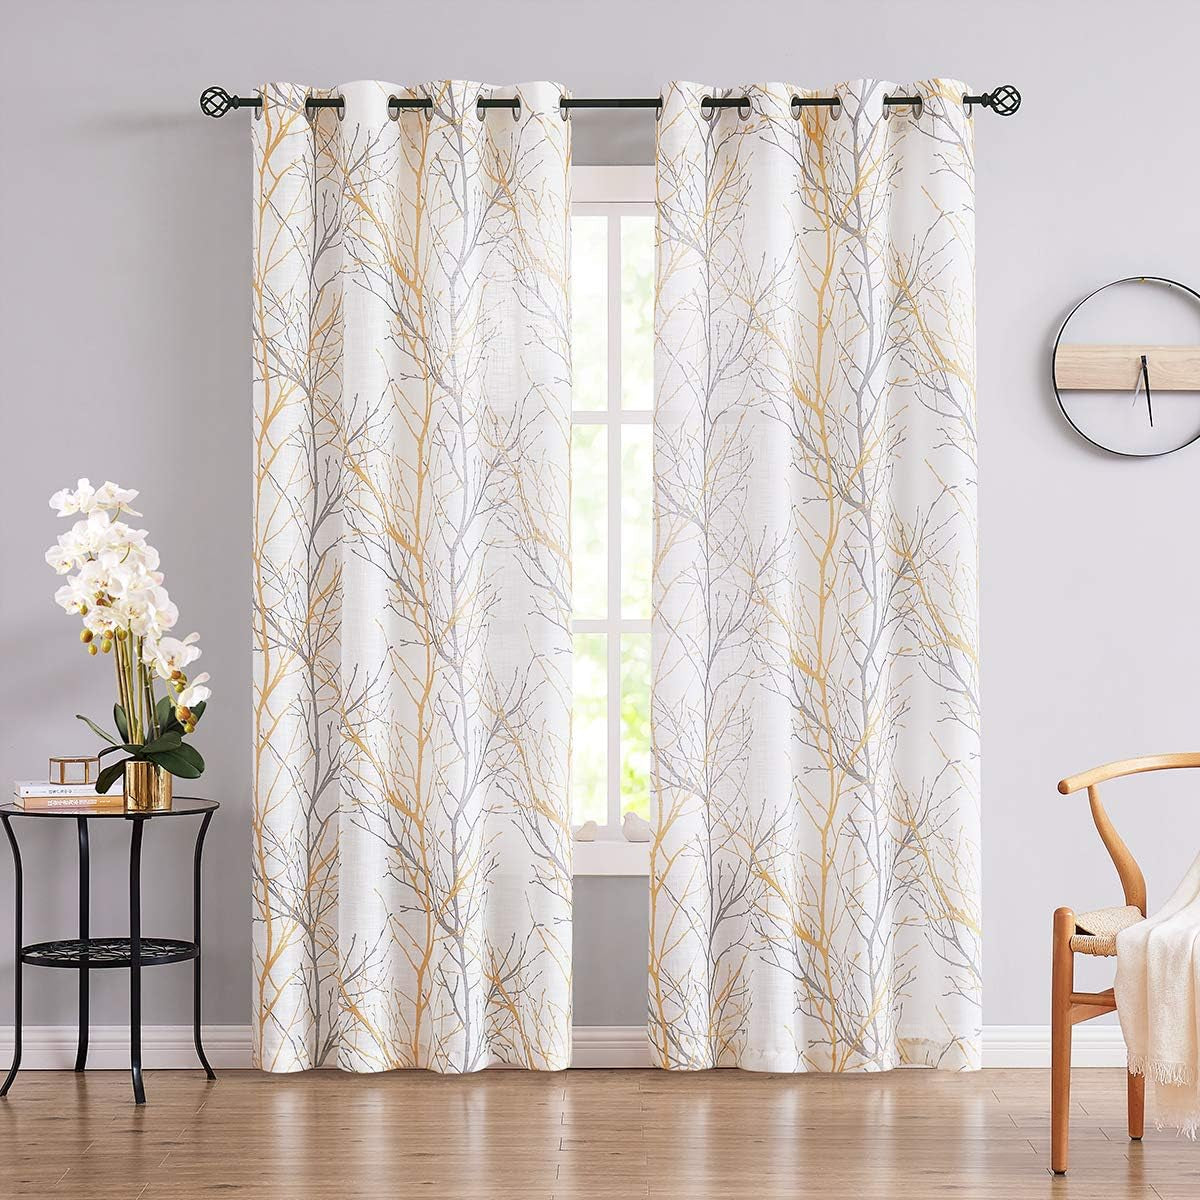 FMFUNCTEX Blue White Curtains for Kitchen Living Room 72“ Grey Tree Branches Print Curtain Set for Small Windows Linen Textured Semi-Sheer Drapes for Bedroom Grommet Top, 2 Panels  Fmfunctex Yellow 50" X 120" |2Pcs 